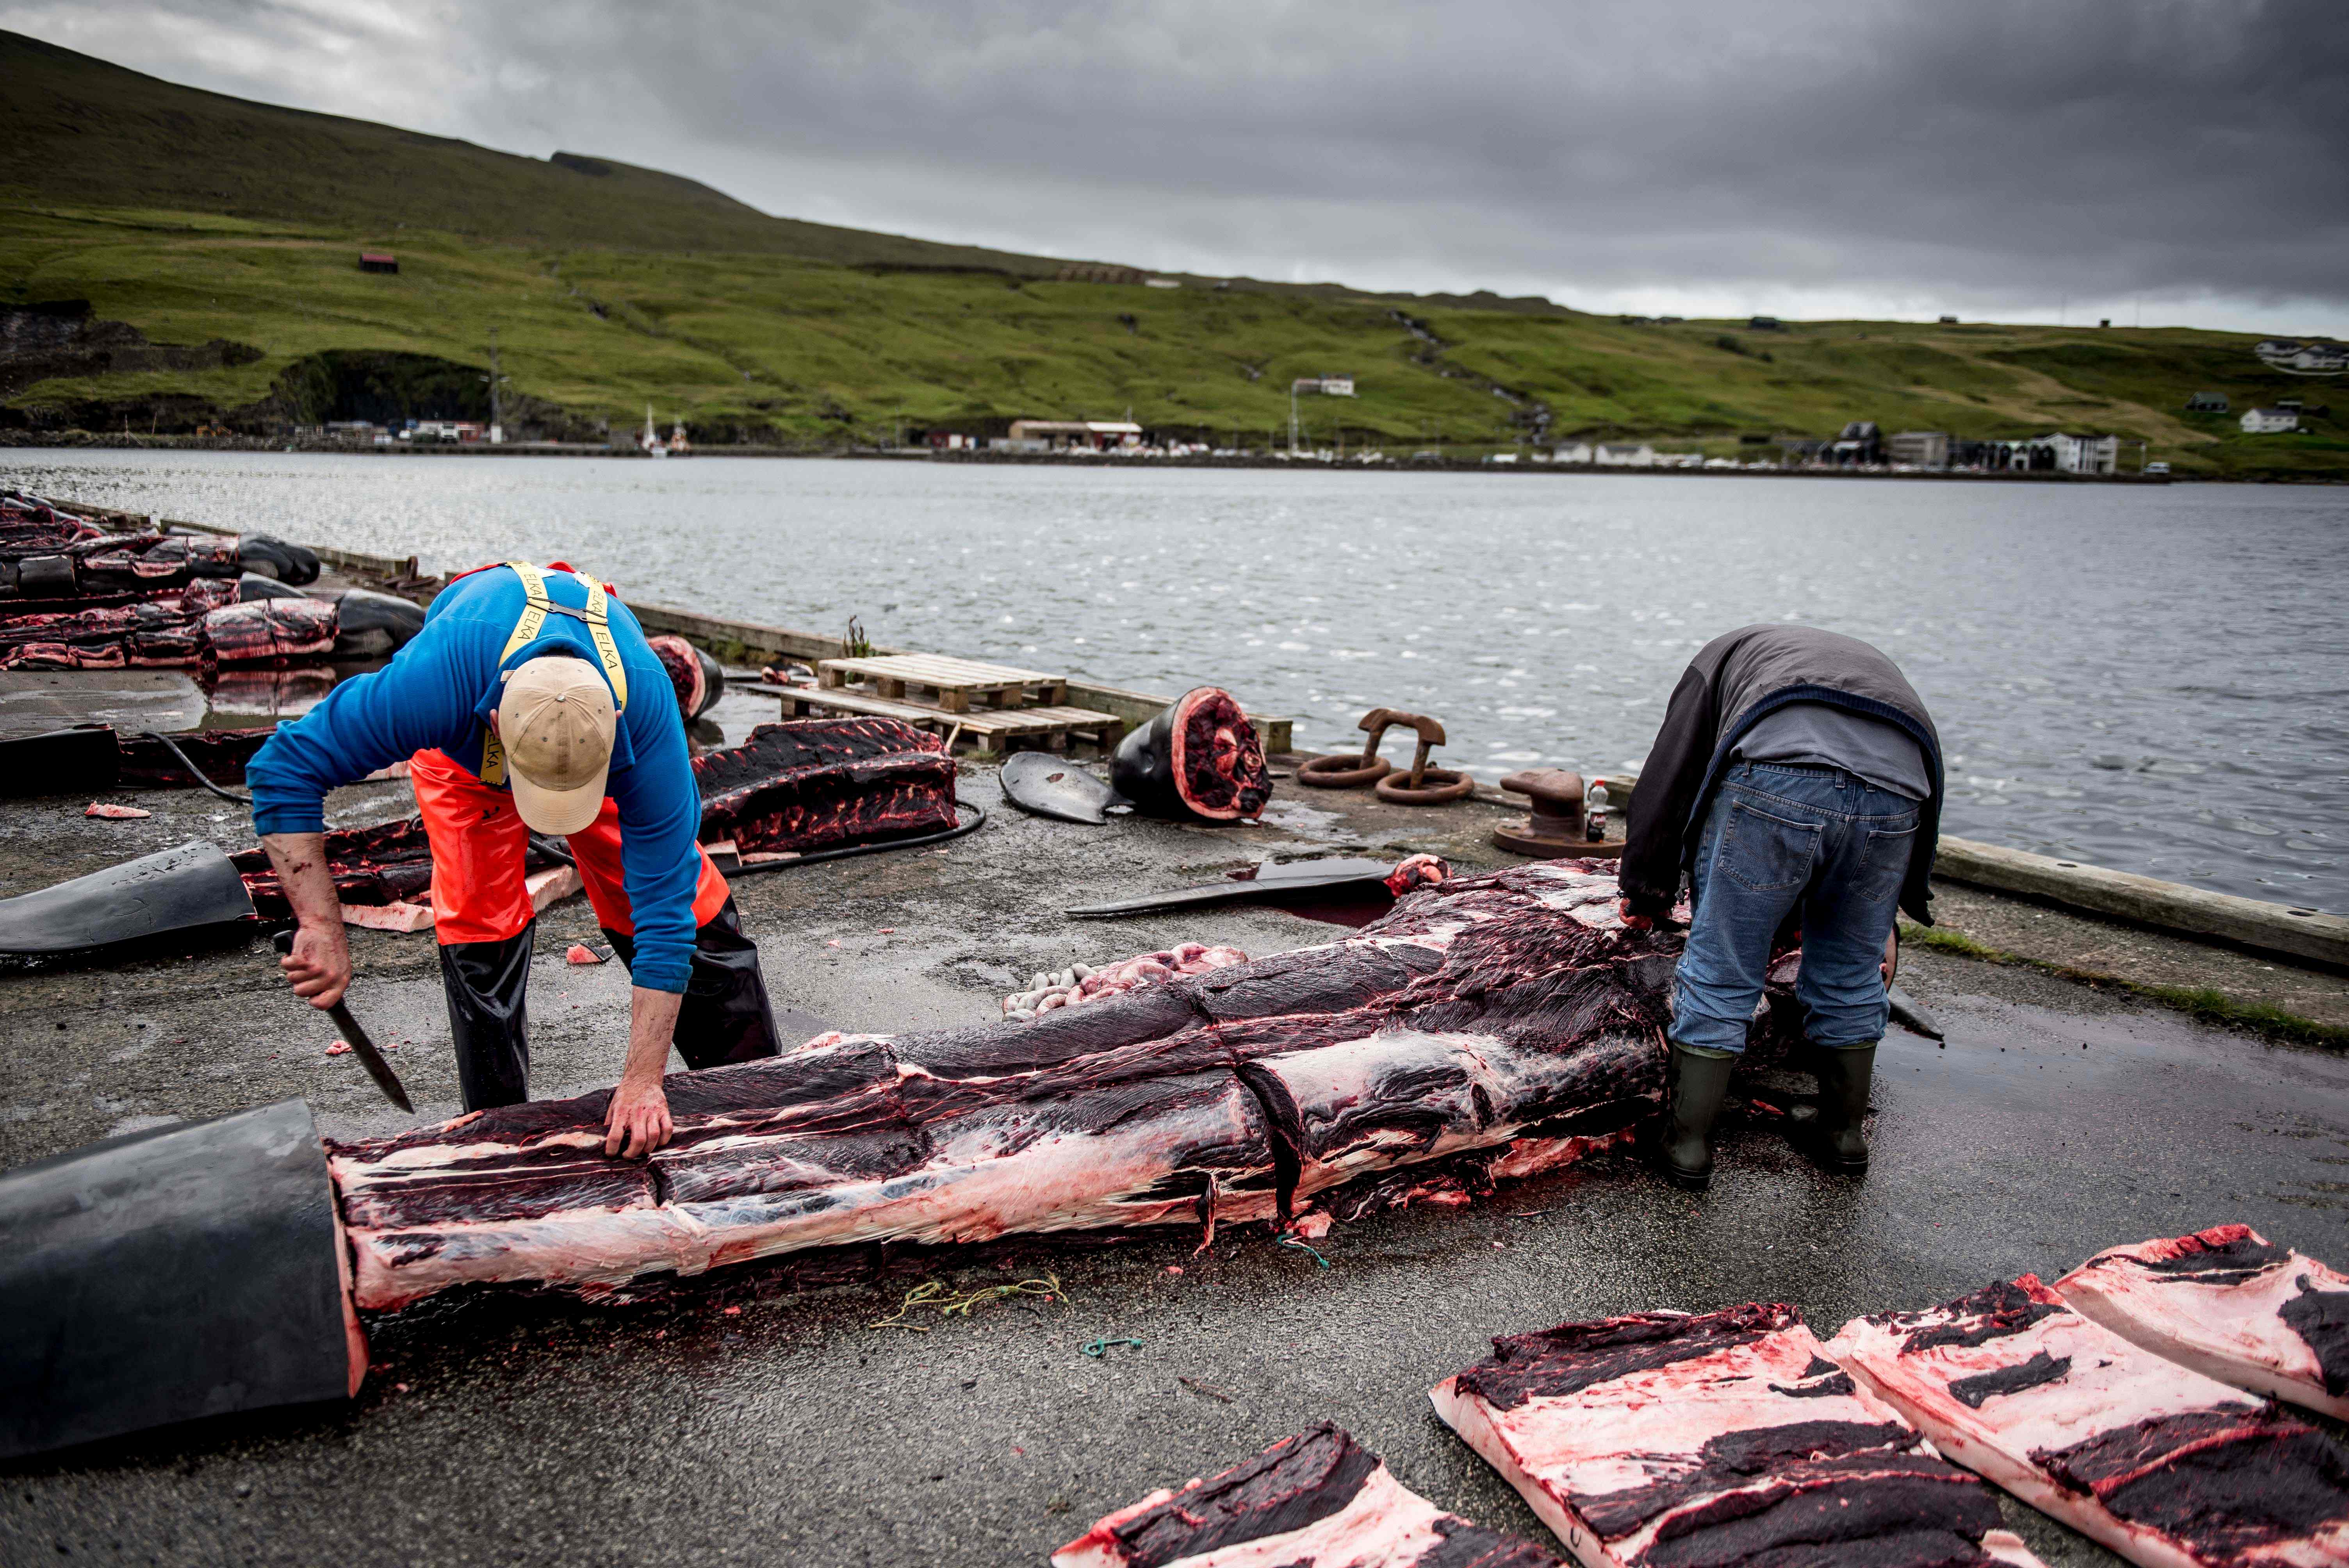 Men skin the body of a pilot whale on the quay in Jatnavegur near Vagar on the Faroe Islands on August 22, 2018. - In the Faroe Islands it is legal and a tradition to catch pilot whales. If a bunch of whales are observed close to the coast, it is driven into one of the 23 approved whale bays. Here the whole flock is killed with knives. When the whales are lifted up on the quay, they are slaughtered. The catch is divided according to an intricate, traditional distribution system between the participants in the hunt and the local residents of the whale bay and people from the local area. Pilot whaling is subject to Faroese legislation, which sets the framework for the catching, killing methods and permitted equipment. The average annual catch is about 900 pilot whales, which corresponds to approximately 500 tons of whale meat and blubber. It accounts for about 30 percent of total local meat production in the Faroe Islands. (Photo by Mads Claus Rasmussen / Ritzau Scanpix / AFP) / Denmark OUT